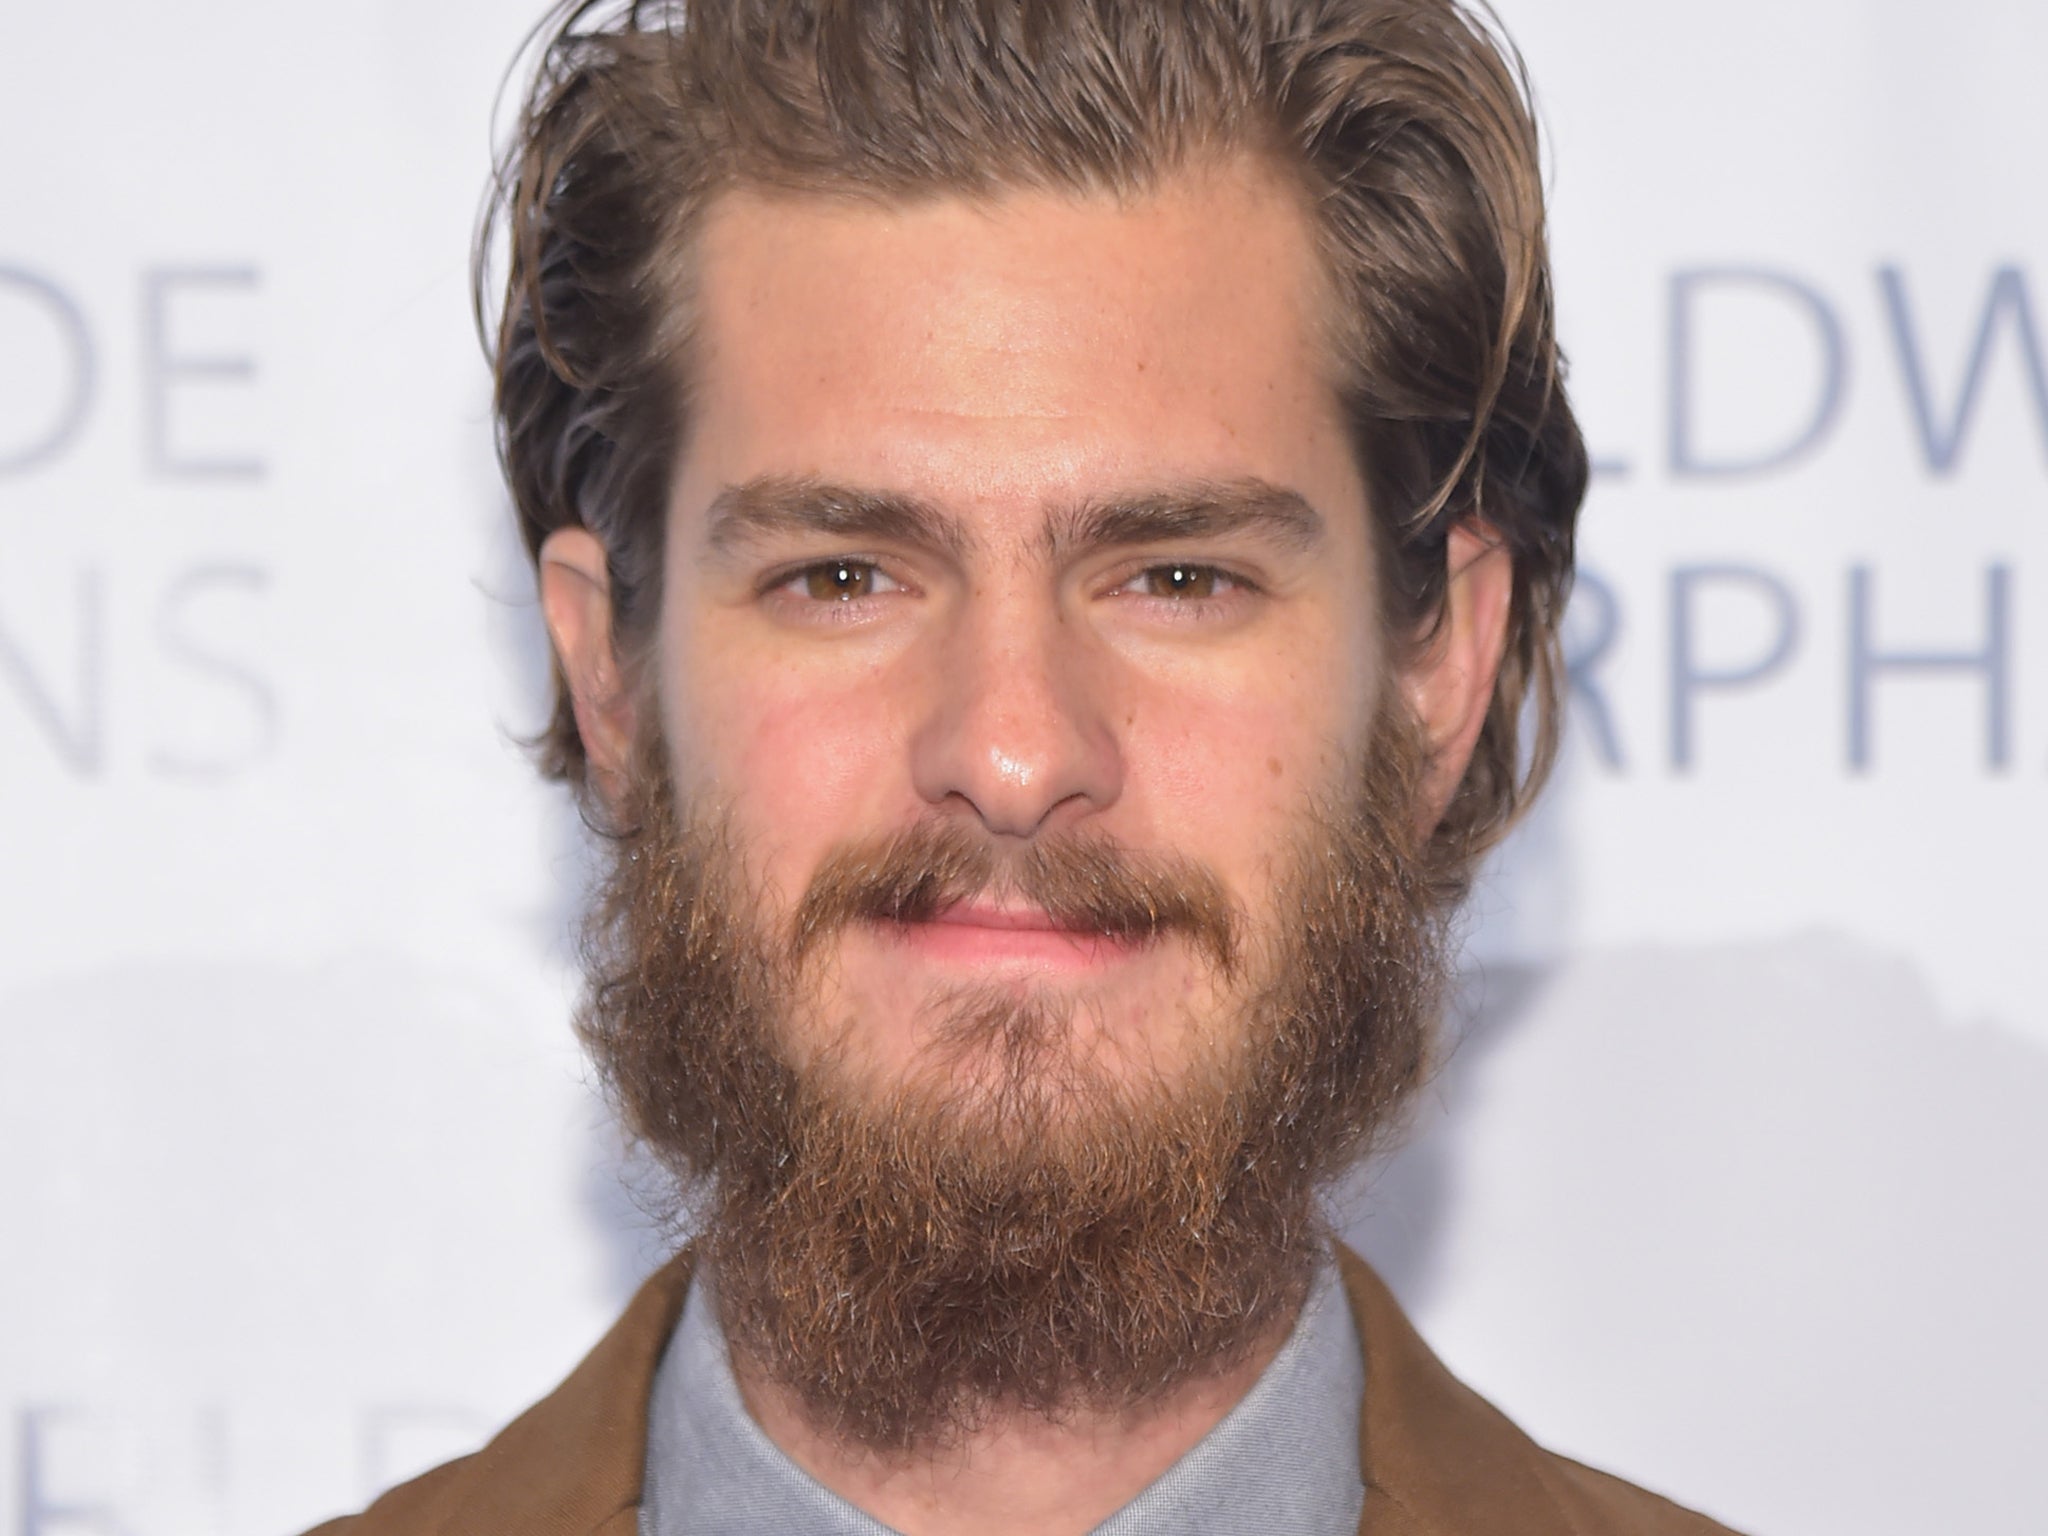 Actor Andrew Garfield attends the Worldwide Orphans' 10th Annual Gala Hosted by Katie Couric at Cipriani, Wall Street